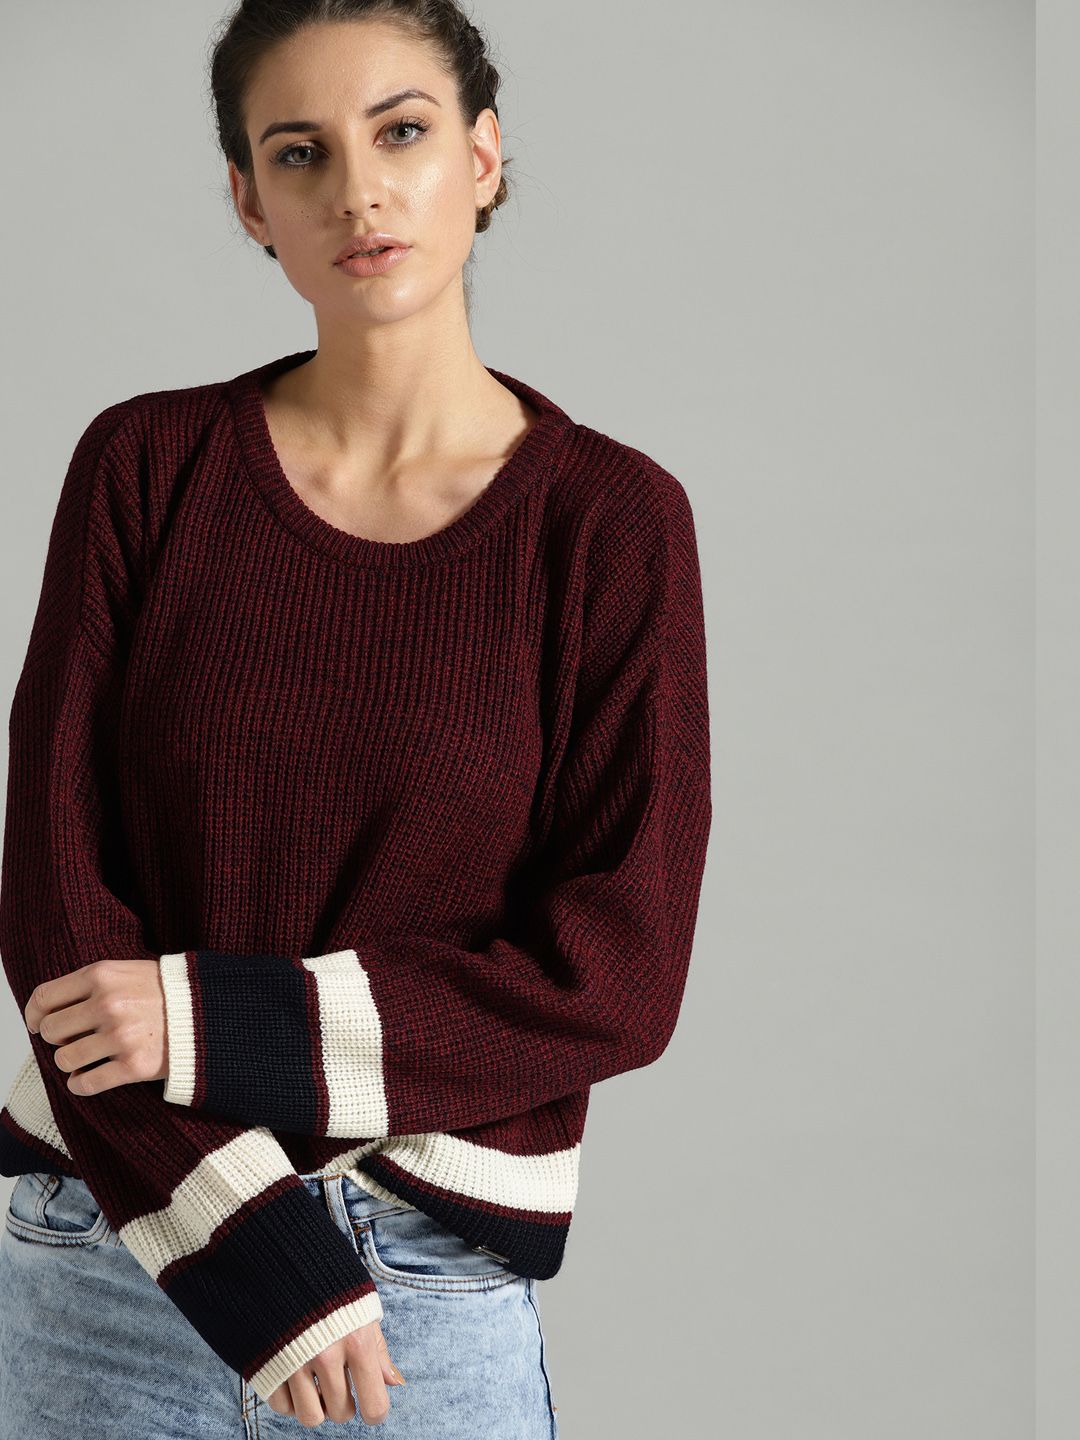 The Roadster Lifestyle Co Women Maroon Solid Sweater Price in India